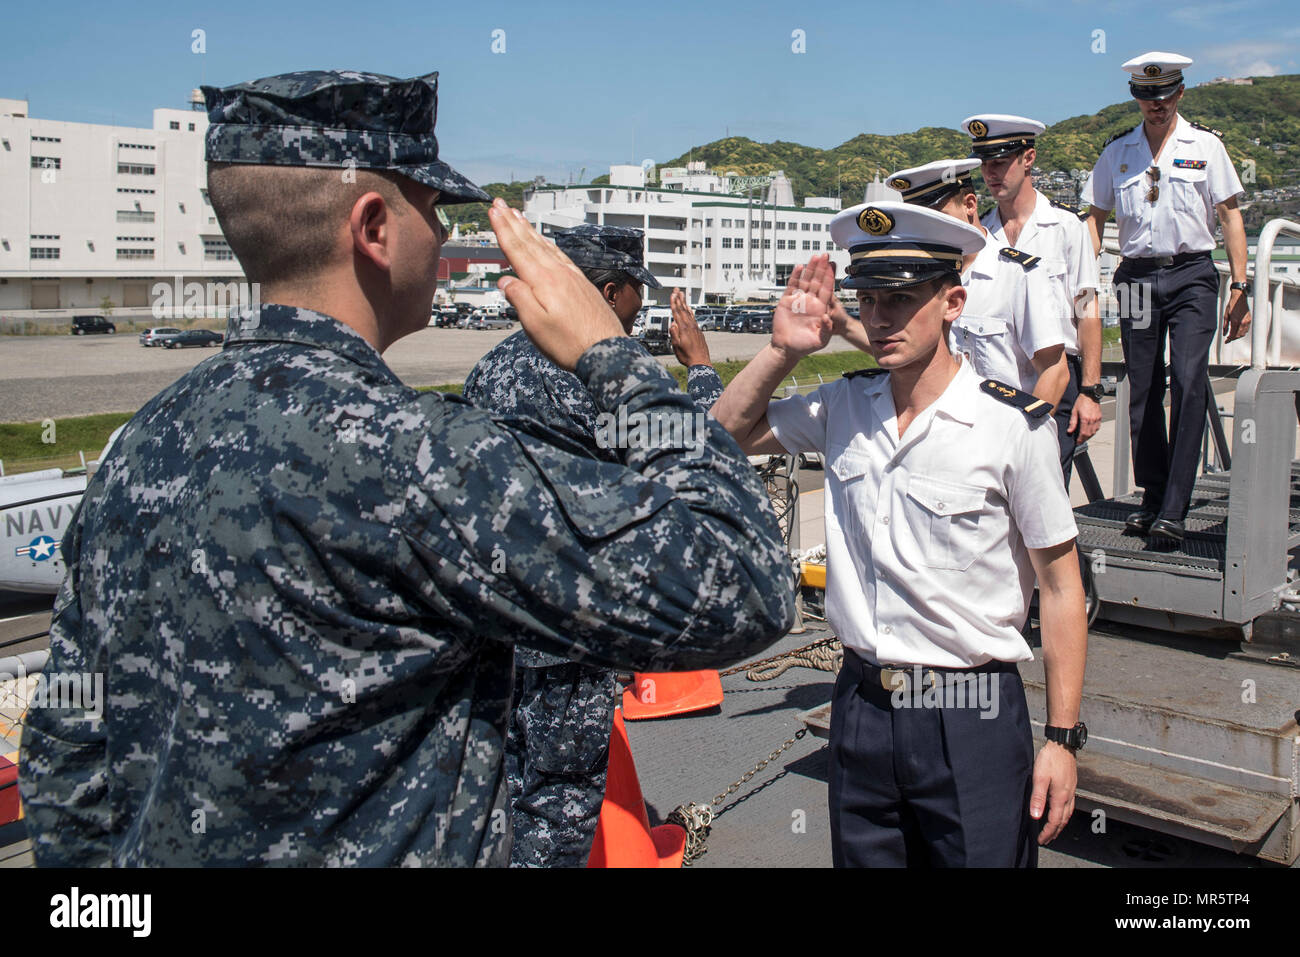 170504-N-XT039-1053 SASEBO, Japan (May 4, 2017) Seaman Recruit Marcel Esquivel, left, from Phoenix, welcomes French sailors assigned to the amphibious assault ship FS Mistral (L9013) as they board the amphibious assault ship USS Bonhomme Richard (LHD 6) for a ship’s tour. Bonhomme Richard, forward-deployed to Sasebo, Japan, is serving forward to provide a rapid-response capability in the event of a regional contingency or natural disaster. (U.S. Navy photo by Mass Communication Specialist Seaman Jesse Marquez Magallanes/Released) Stock Photo